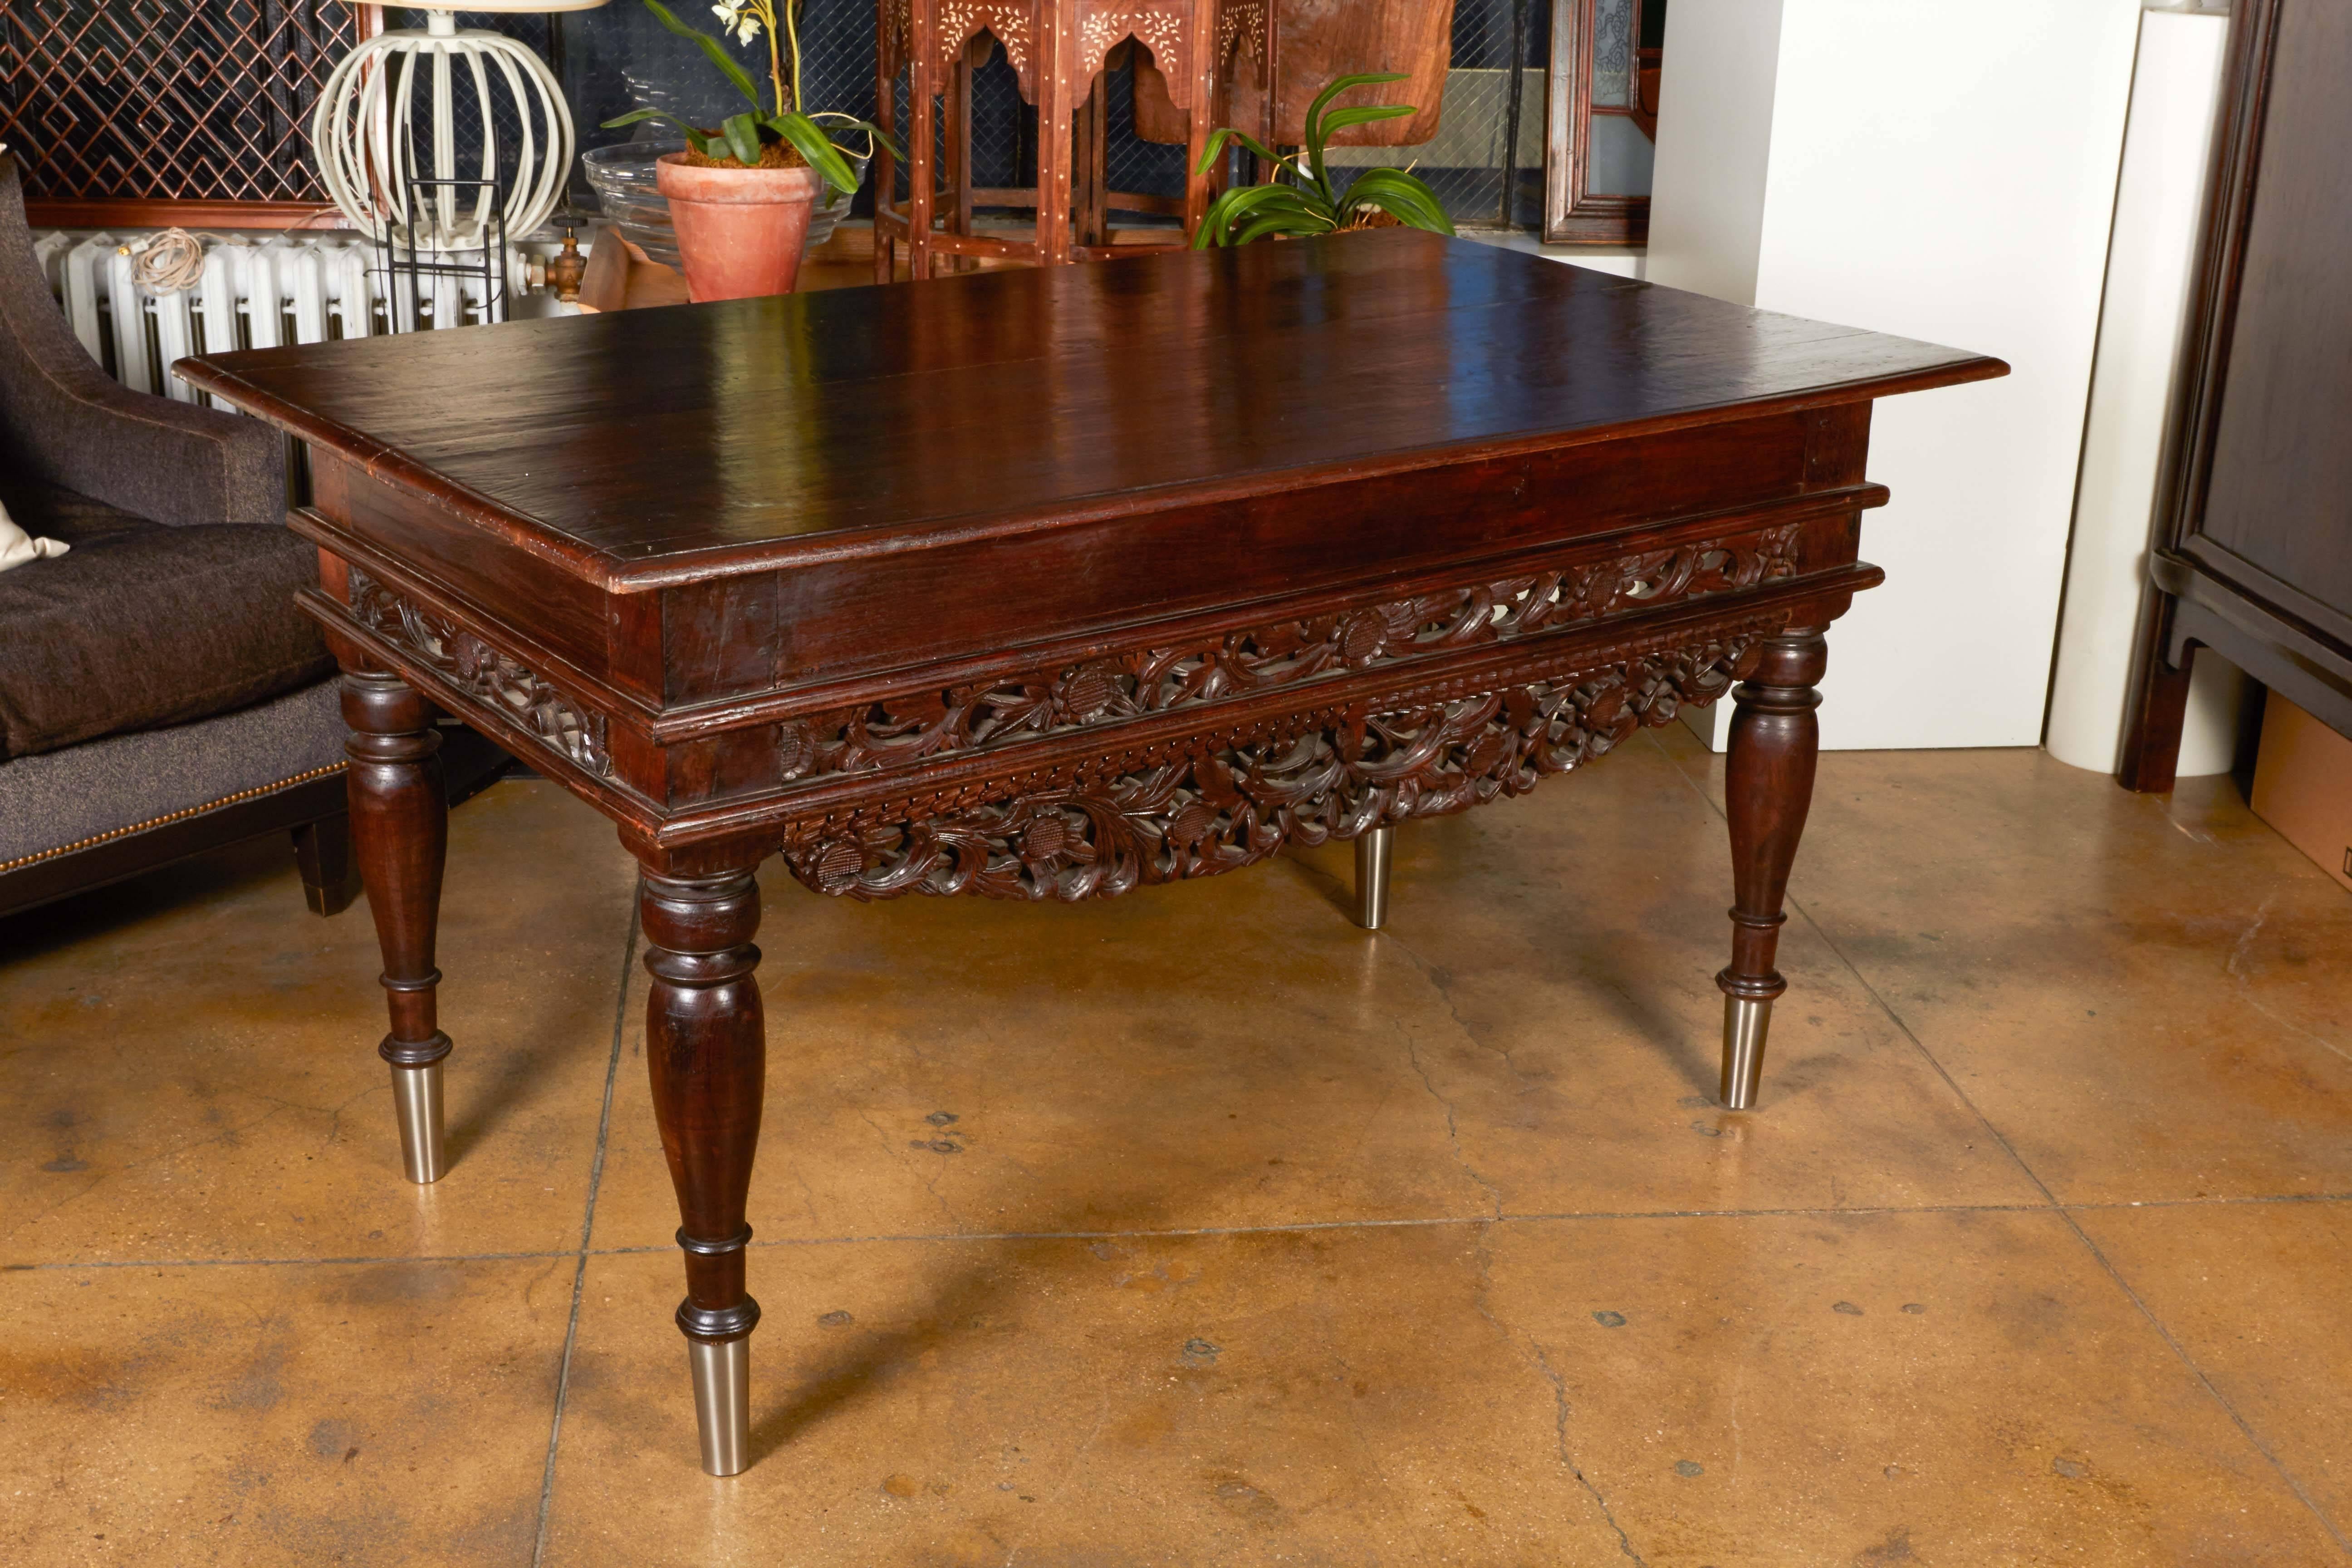 Indonesian Madura Desk with Ornately Carved Front